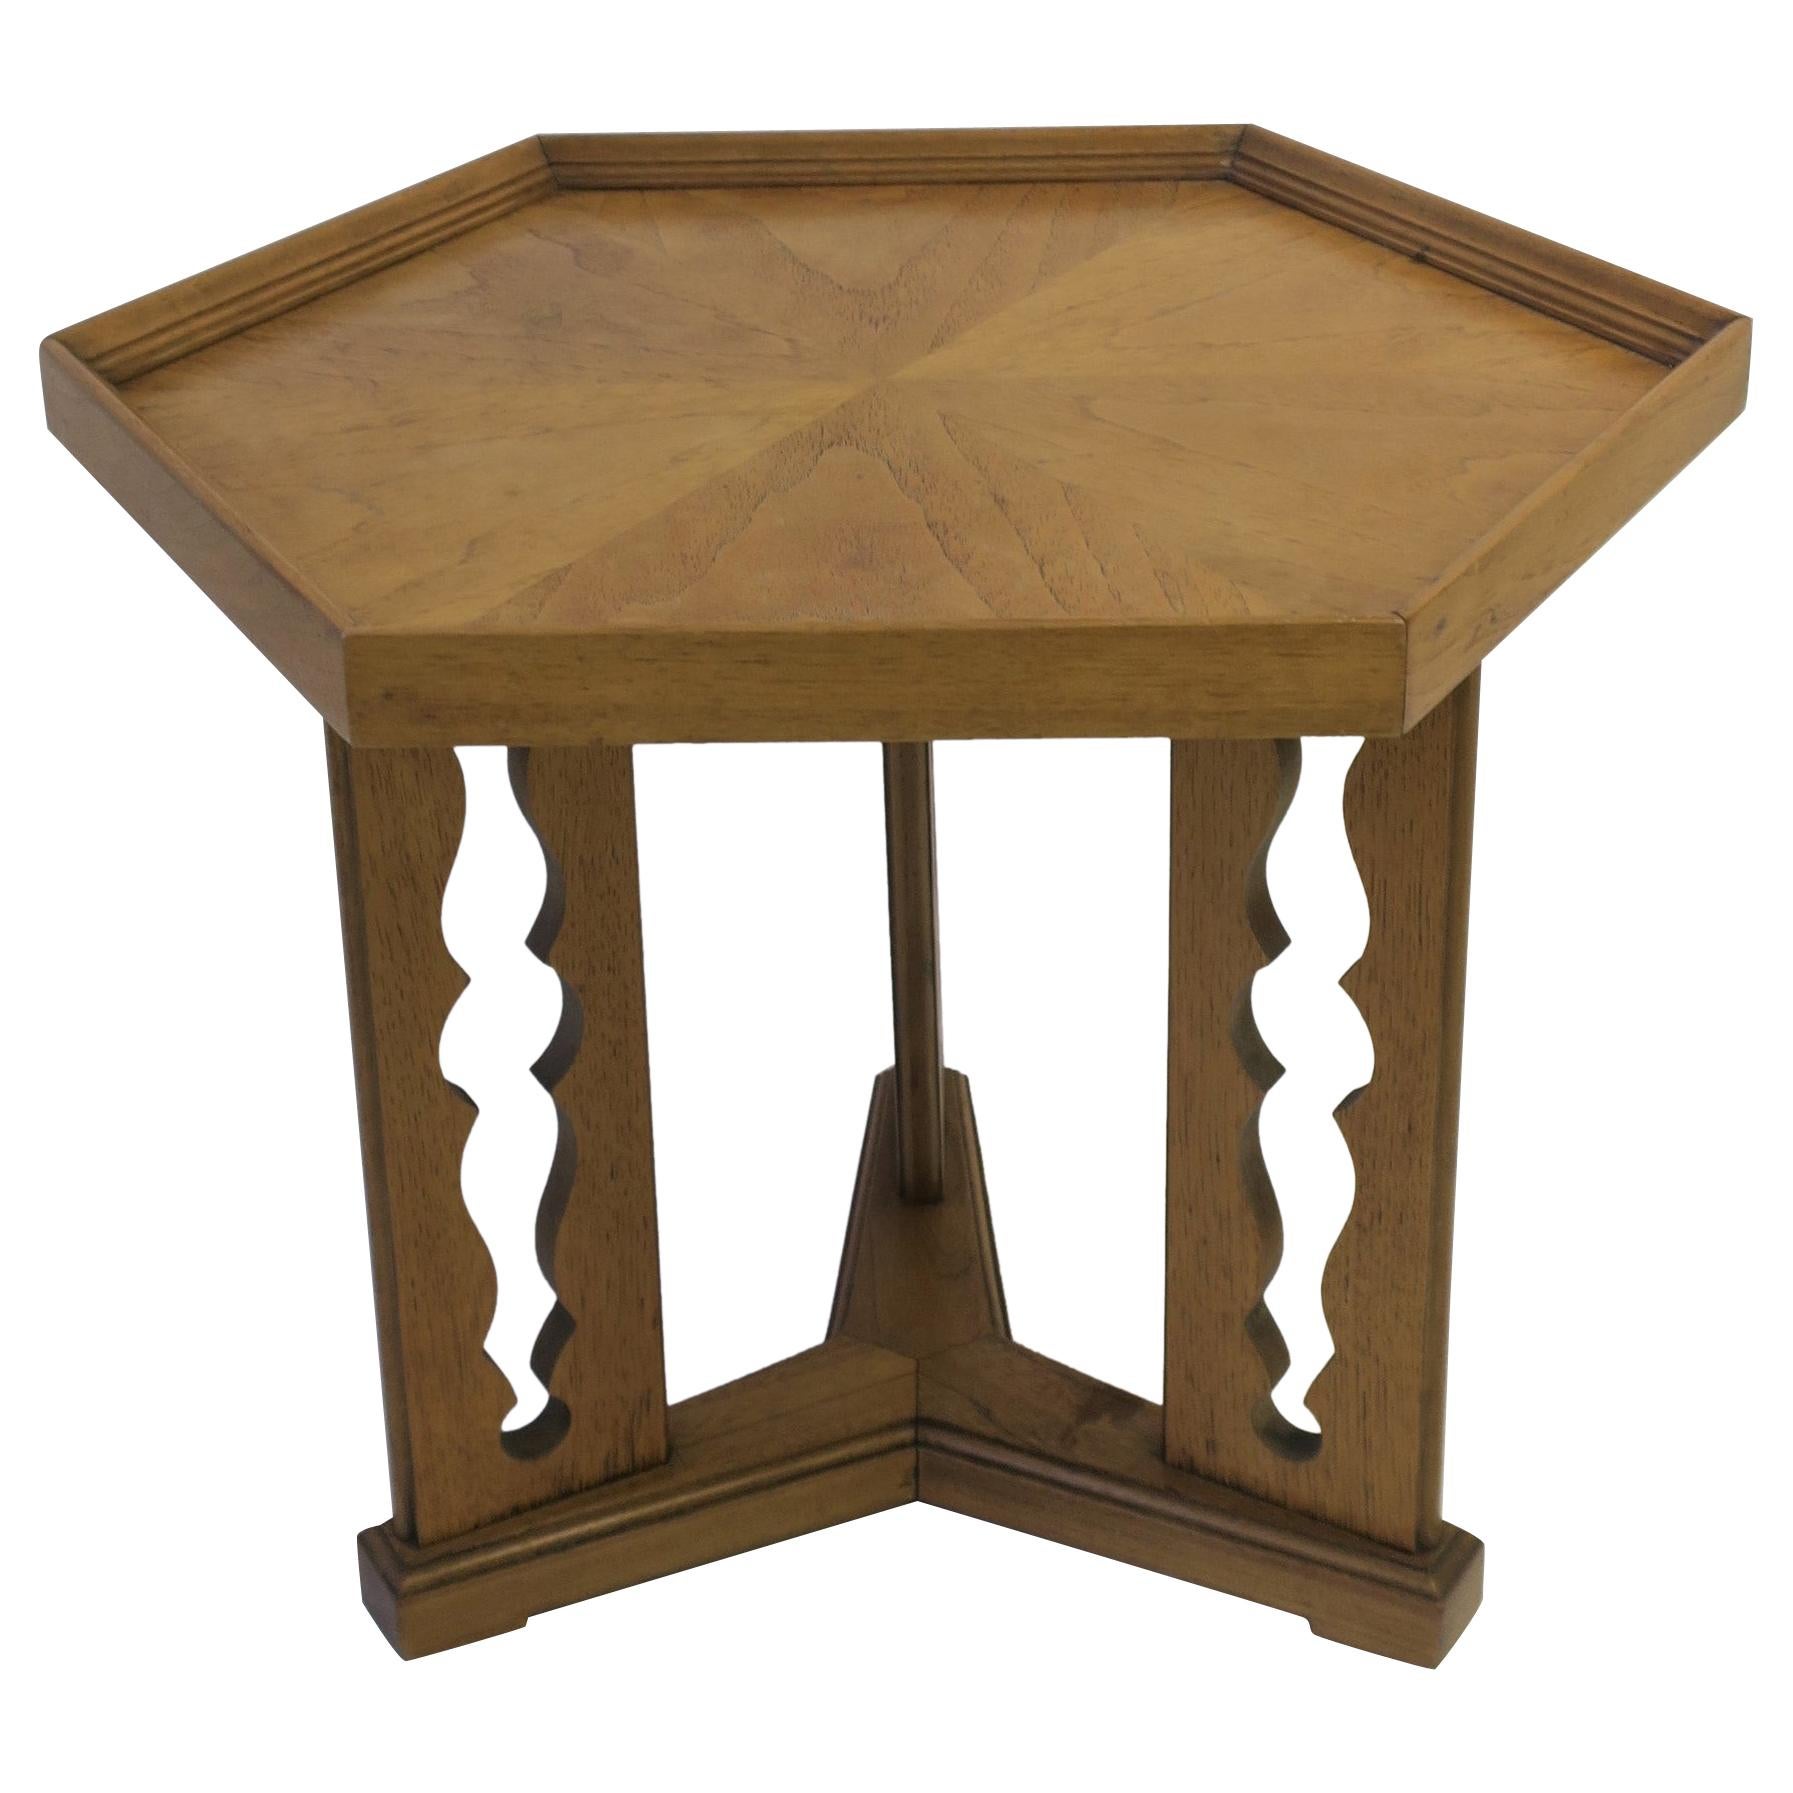 Hexagon Wood Side or End Table Esperanto by Drexel